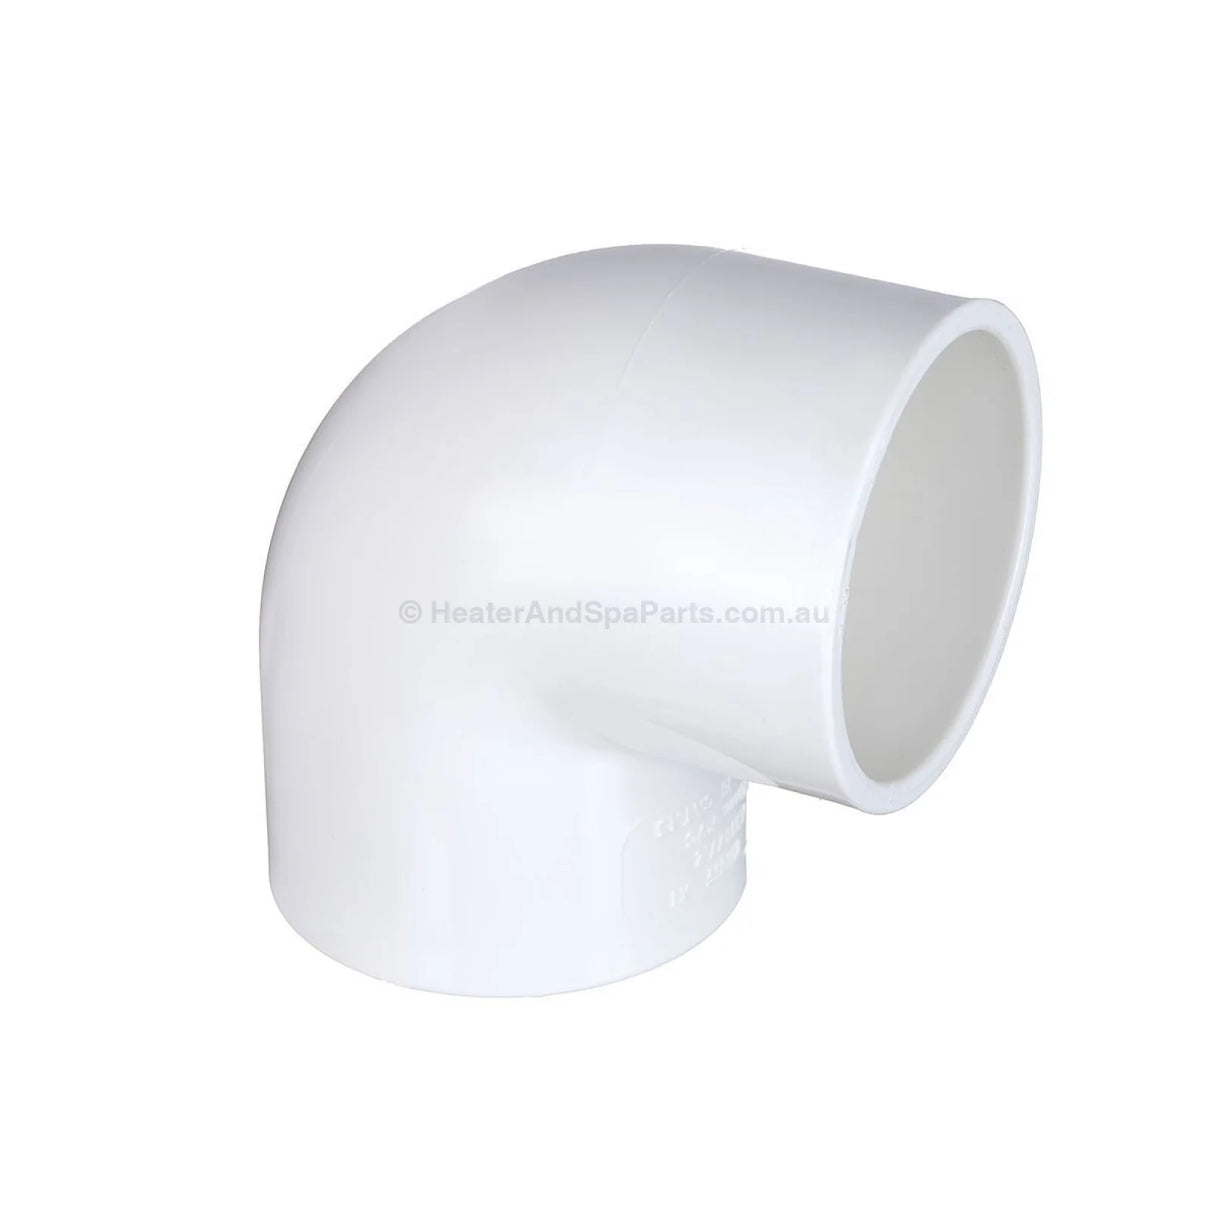 50mm - 90° Elbow - PVC - Heater and Spa Parts